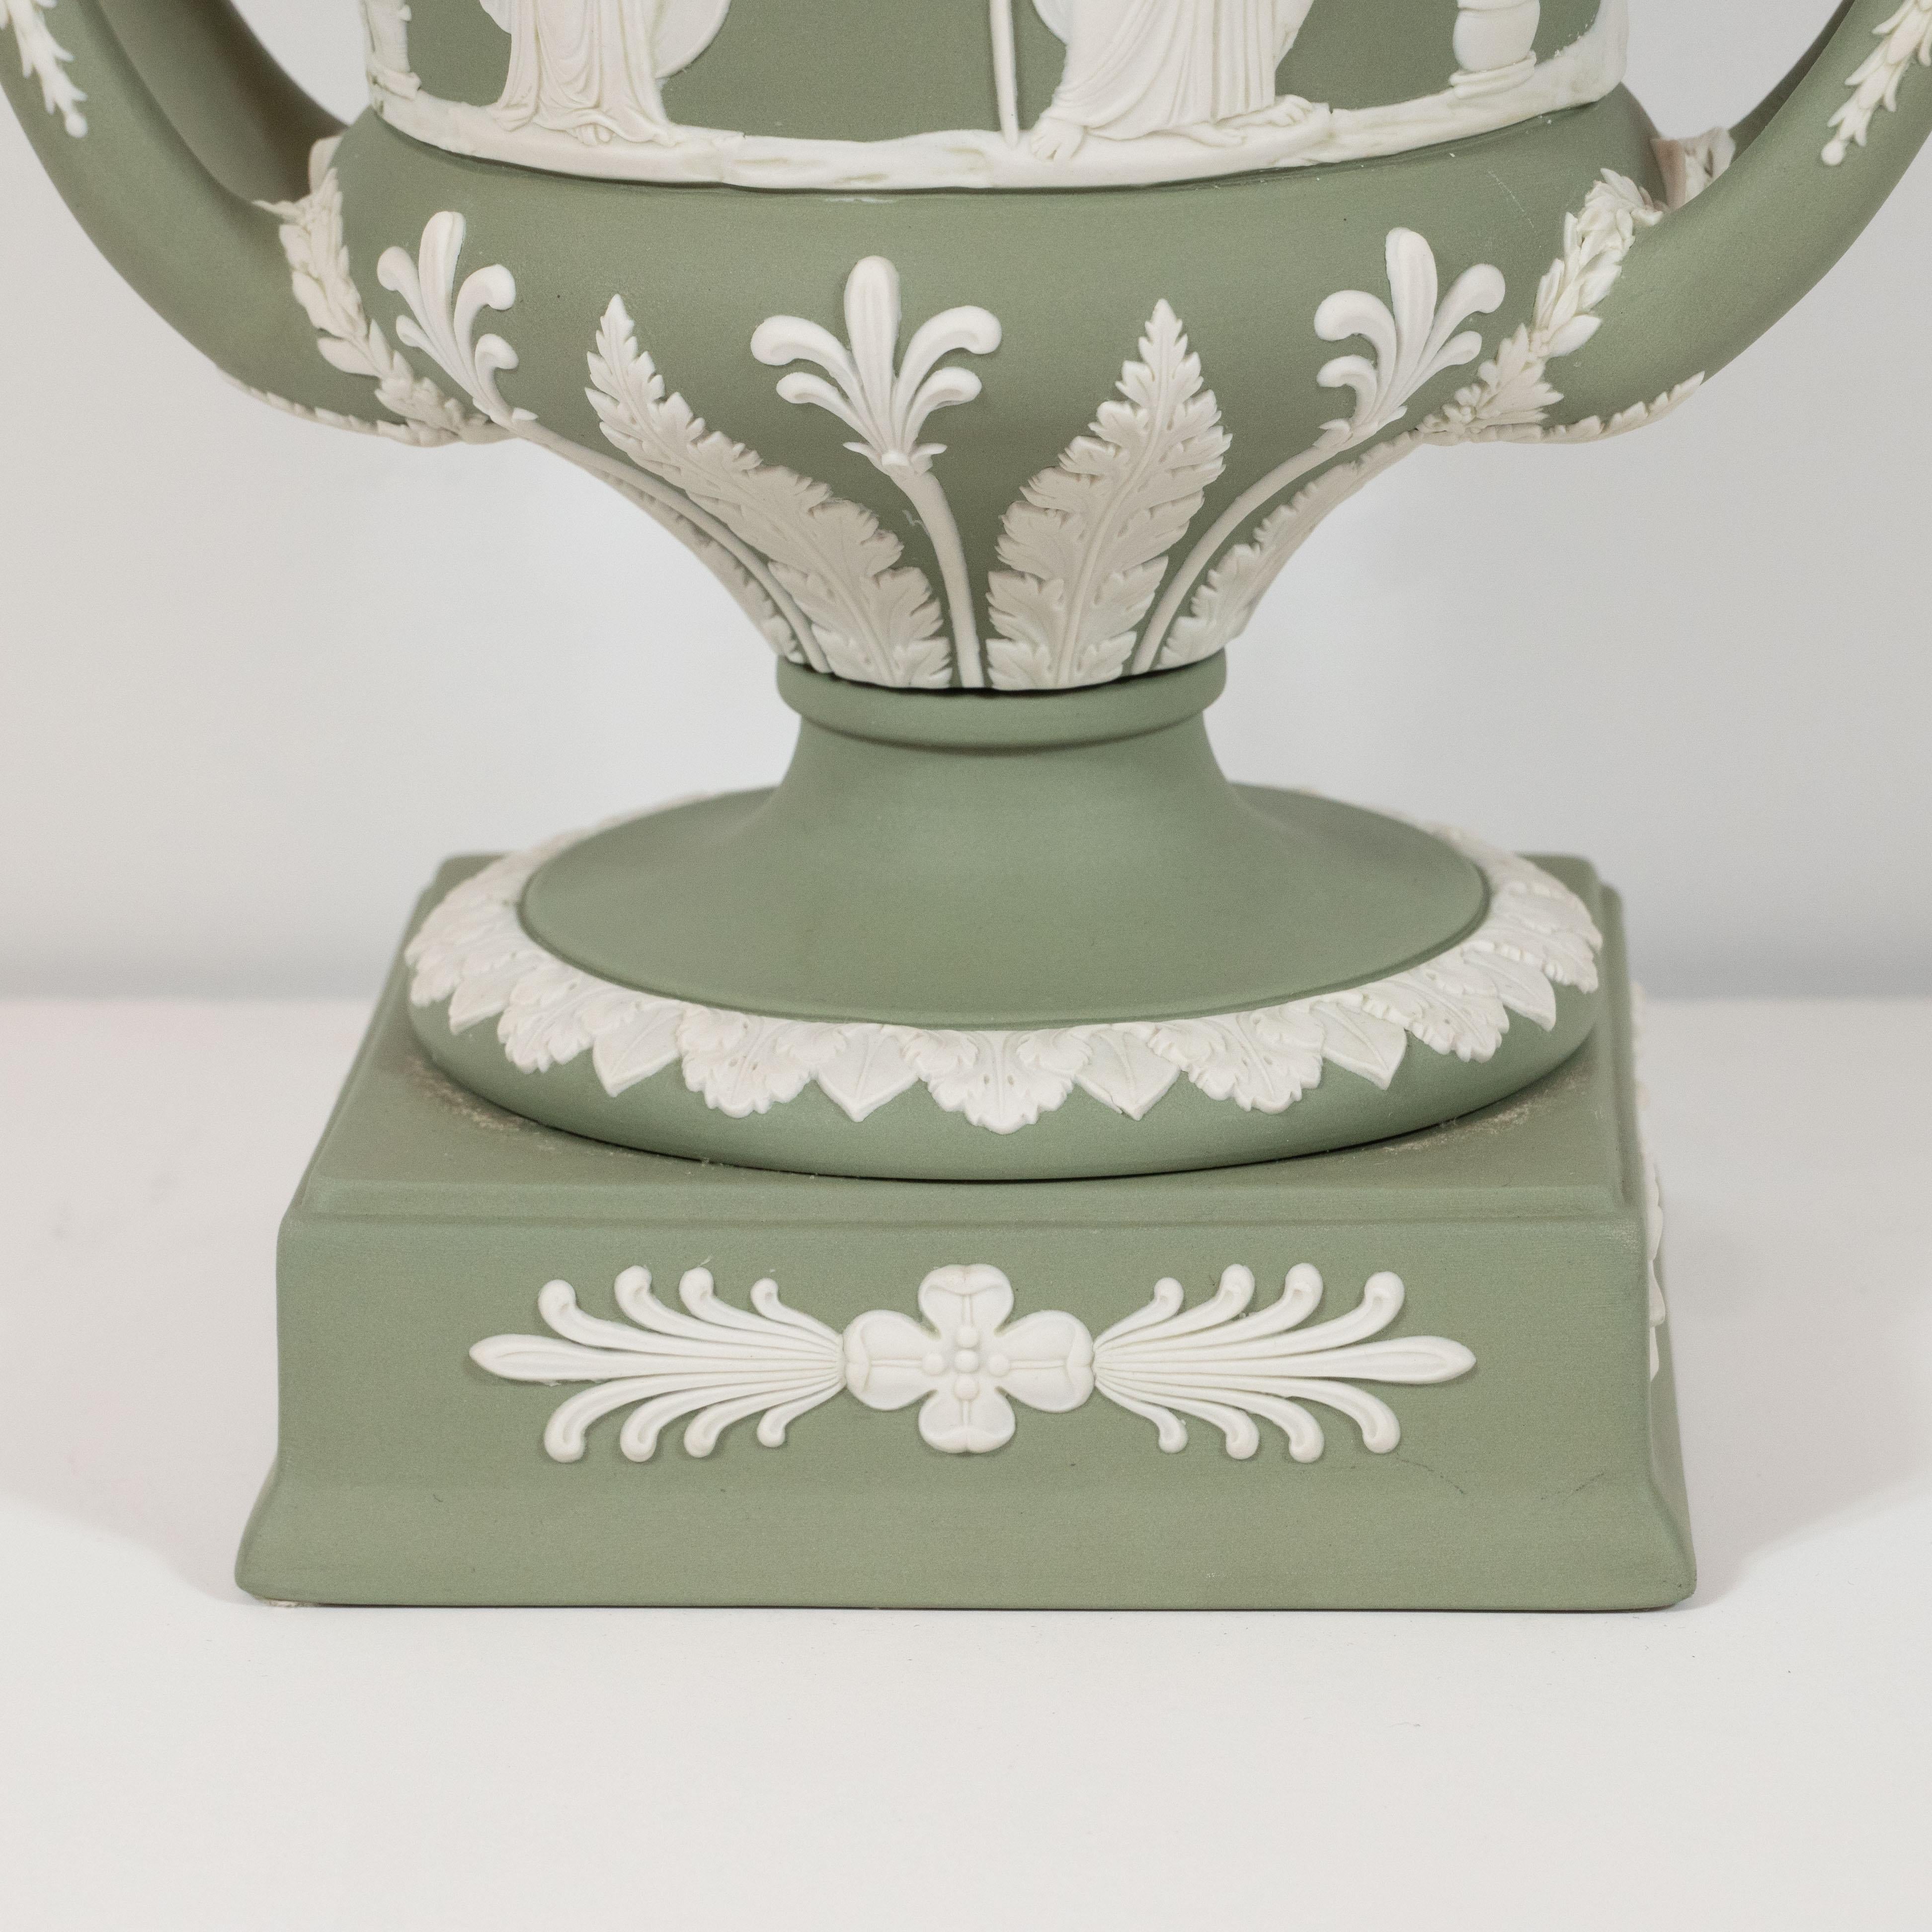 Mid-20th Century Neoclassical Jasperware Ceramic Covered Urn in Olive and White by Wedgwood